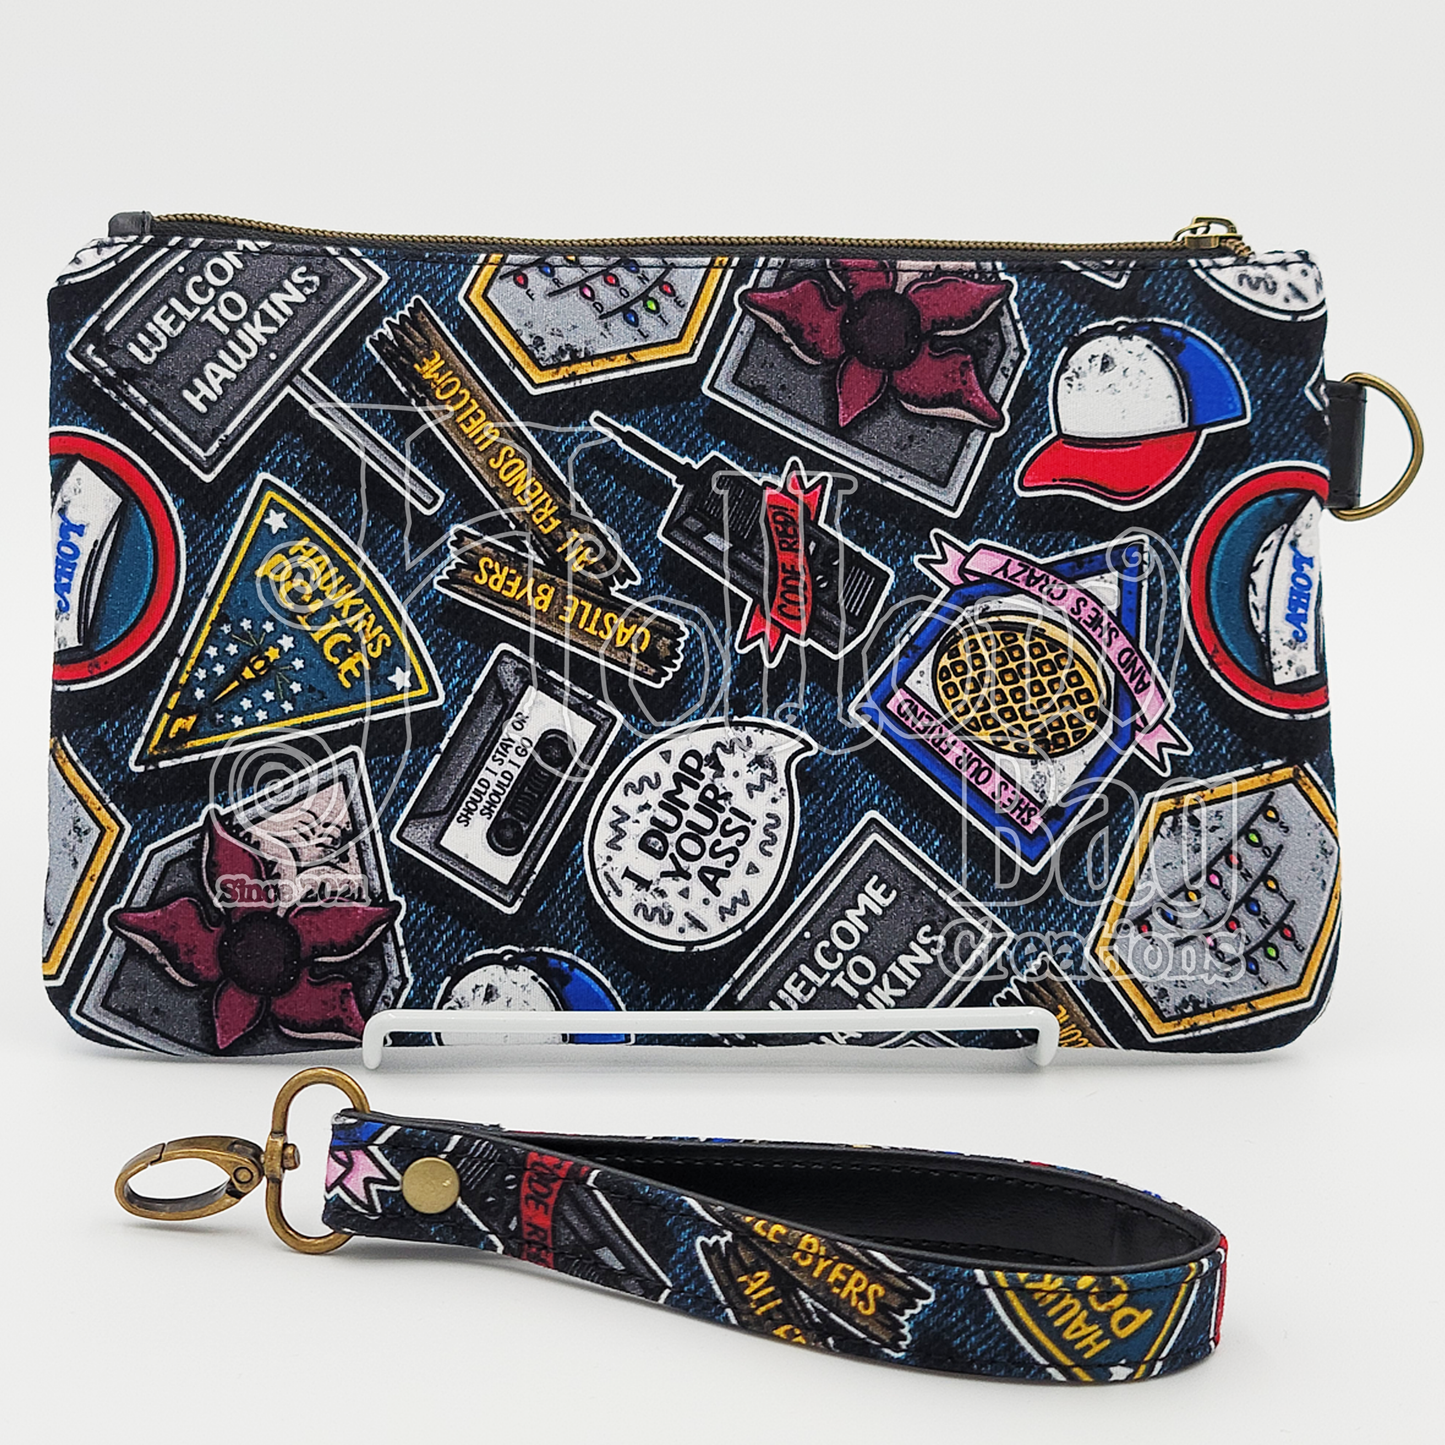 Wristlet Pouch - Things are Strange